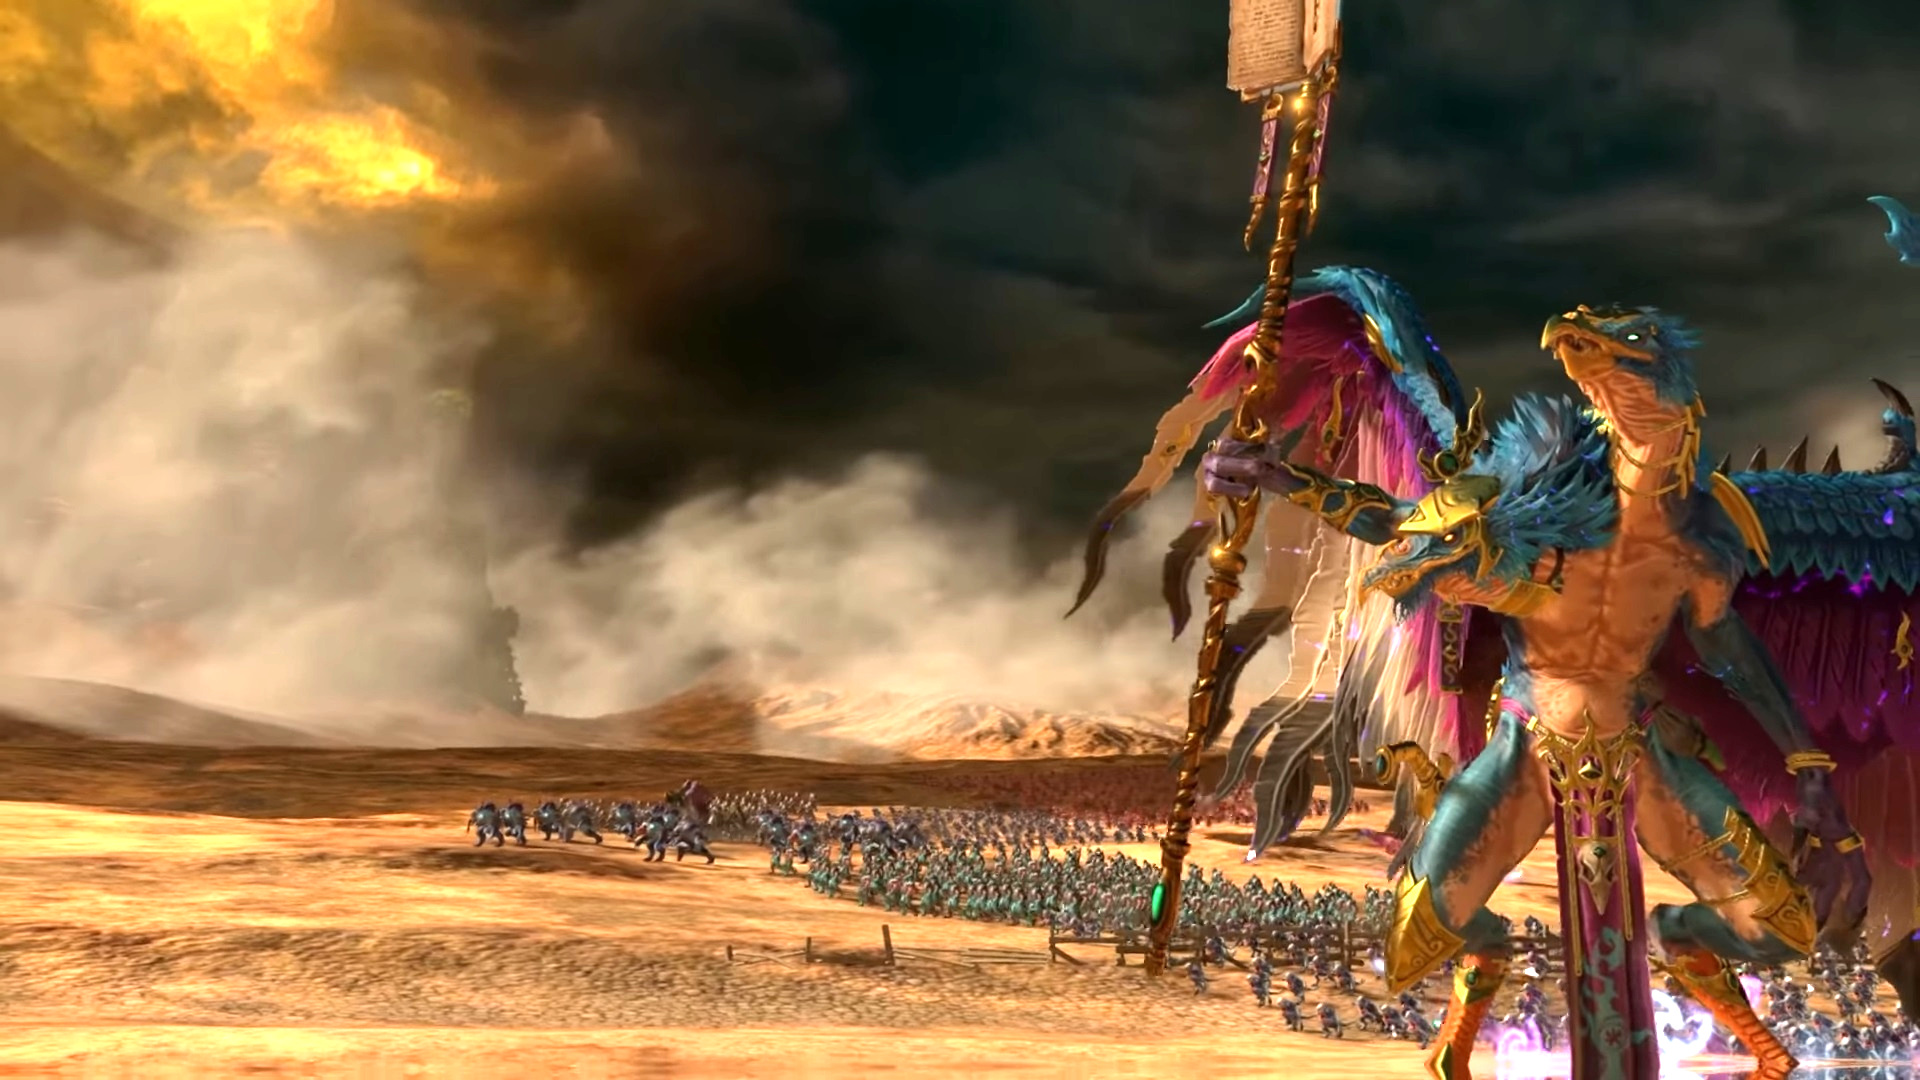 Total Warhammer 3's new trailer pits Cathay against Tzeentch in an epic siege